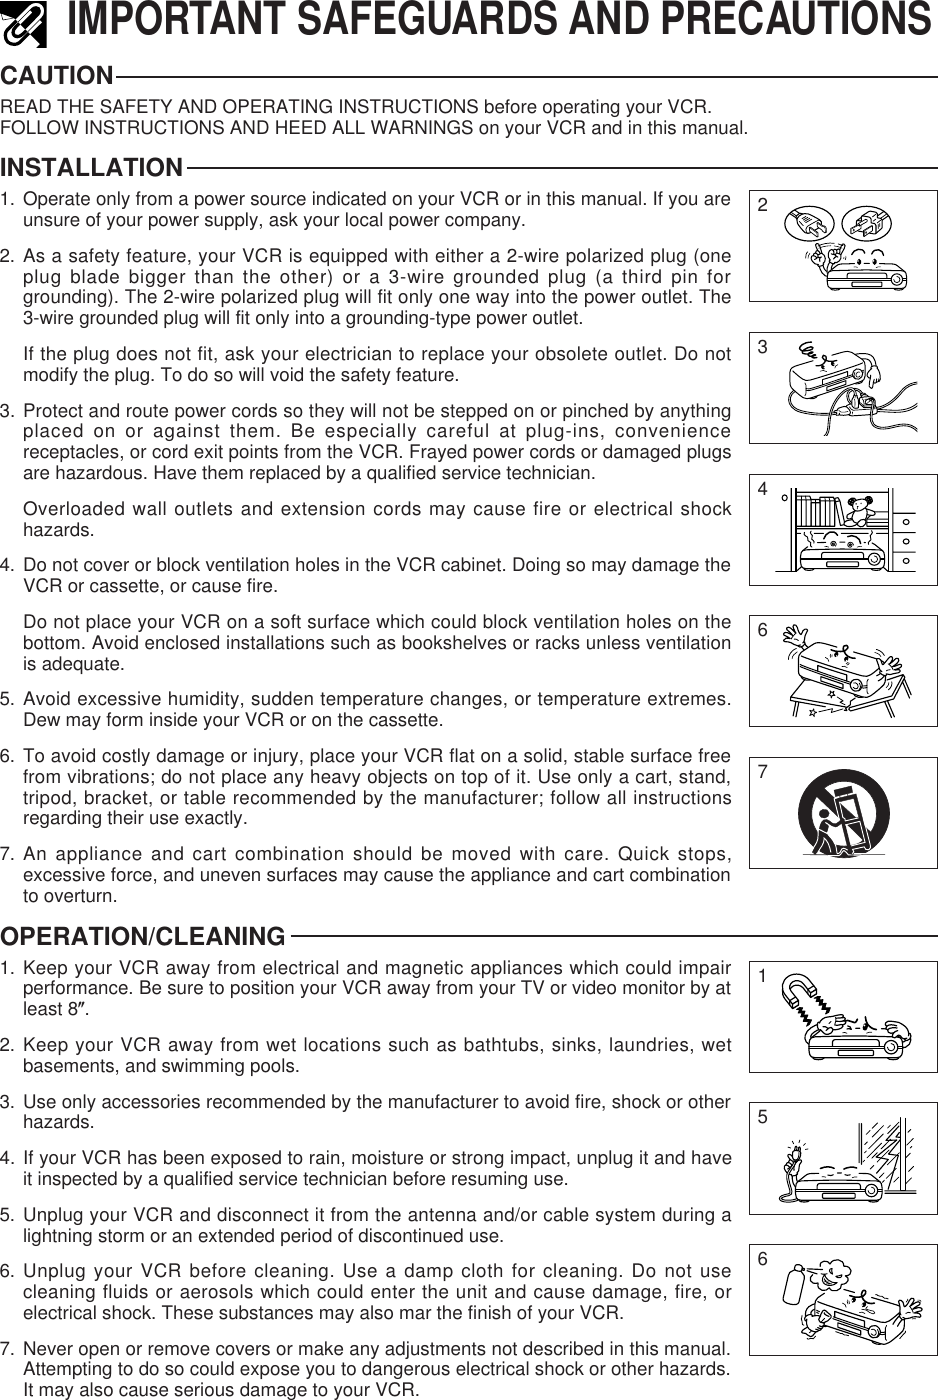 IMPORTANT SAFEGUARDS AND PRECAUTIONSCAUTIONREAD THE SAFETY AND OPERATING INSTRUCTIONS before operating your VCR.FOLLOW INSTRUCTIONS AND HEED ALL WARNINGS on your VCR and in this manual.INSTALLATION1. Operate only from a power source indicated on your VCR or in this manual. If you areunsure of your power supply, ask your local power company.2. As a safety feature, your VCR is equipped with either a 2-wire polarized plug (oneplug blade bigger than the other) or a 3-wire grounded plug (a third pin forgrounding). The 2-wire polarized plug will fit only one way into the power outlet. The3-wire grounded plug will fit only into a grounding-type power outlet.If the plug does not fit, ask your electrician to replace your obsolete outlet. Do notmodify the plug. To do so will void the safety feature.3. Protect and route power cords so they will not be stepped on or pinched by anythingplaced on or against them. Be especially careful at plug-ins, conveniencereceptacles, or cord exit points from the VCR. Frayed power cords or damaged plugsare hazardous. Have them replaced by a qualified service technician.Overloaded wall outlets and extension cords may cause fire or electrical shockhazards.4. Do not cover or block ventilation holes in the VCR cabinet. Doing so may damage theVCR or cassette, or cause fire.Do not place your VCR on a soft surface which could block ventilation holes on thebottom. Avoid enclosed installations such as bookshelves or racks unless ventilationis adequate.5. Avoid excessive humidity, sudden temperature changes, or temperature extremes.Dew may form inside your VCR or on the cassette.6. To avoid costly damage or injury, place your VCR flat on a solid, stable surface freefrom vibrations; do not place any heavy objects on top of it. Use only a cart, stand,tripod, bracket, or table recommended by the manufacturer; follow all instructionsregarding their use exactly.7. An appliance and cart combination should be moved with care. Quick stops,excessive force, and uneven surfaces may cause the appliance and cart combinationto overturn.OPERATION/CLEANING1. Keep your VCR away from electrical and magnetic appliances which could impairperformance. Be sure to position your VCR away from your TV or video monitor by atleast 8(.2. Keep your VCR away from wet locations such as bathtubs, sinks, laundries, wetbasements, and swimming pools.3. Use only accessories recommended by the manufacturer to avoid fire, shock or otherhazards.4. If your VCR has been exposed to rain, moisture or strong impact, unplug it and haveit inspected by a qualified service technician before resuming use.5. Unplug your VCR and disconnect it from the antenna and/or cable system during alightning storm or an extended period of discontinued use.6. Unplug your VCR before cleaning. Use a damp cloth for cleaning. Do not usecleaning fluids or aerosols which could enter the unit and cause damage, fire, orelectrical shock. These substances may also mar the finish of your VCR.7. Never open or remove covers or make any adjustments not described in this manual.Attempting to do so could expose you to dangerous electrical shock or other hazards.It may also cause serious damage to your VCR.23467651